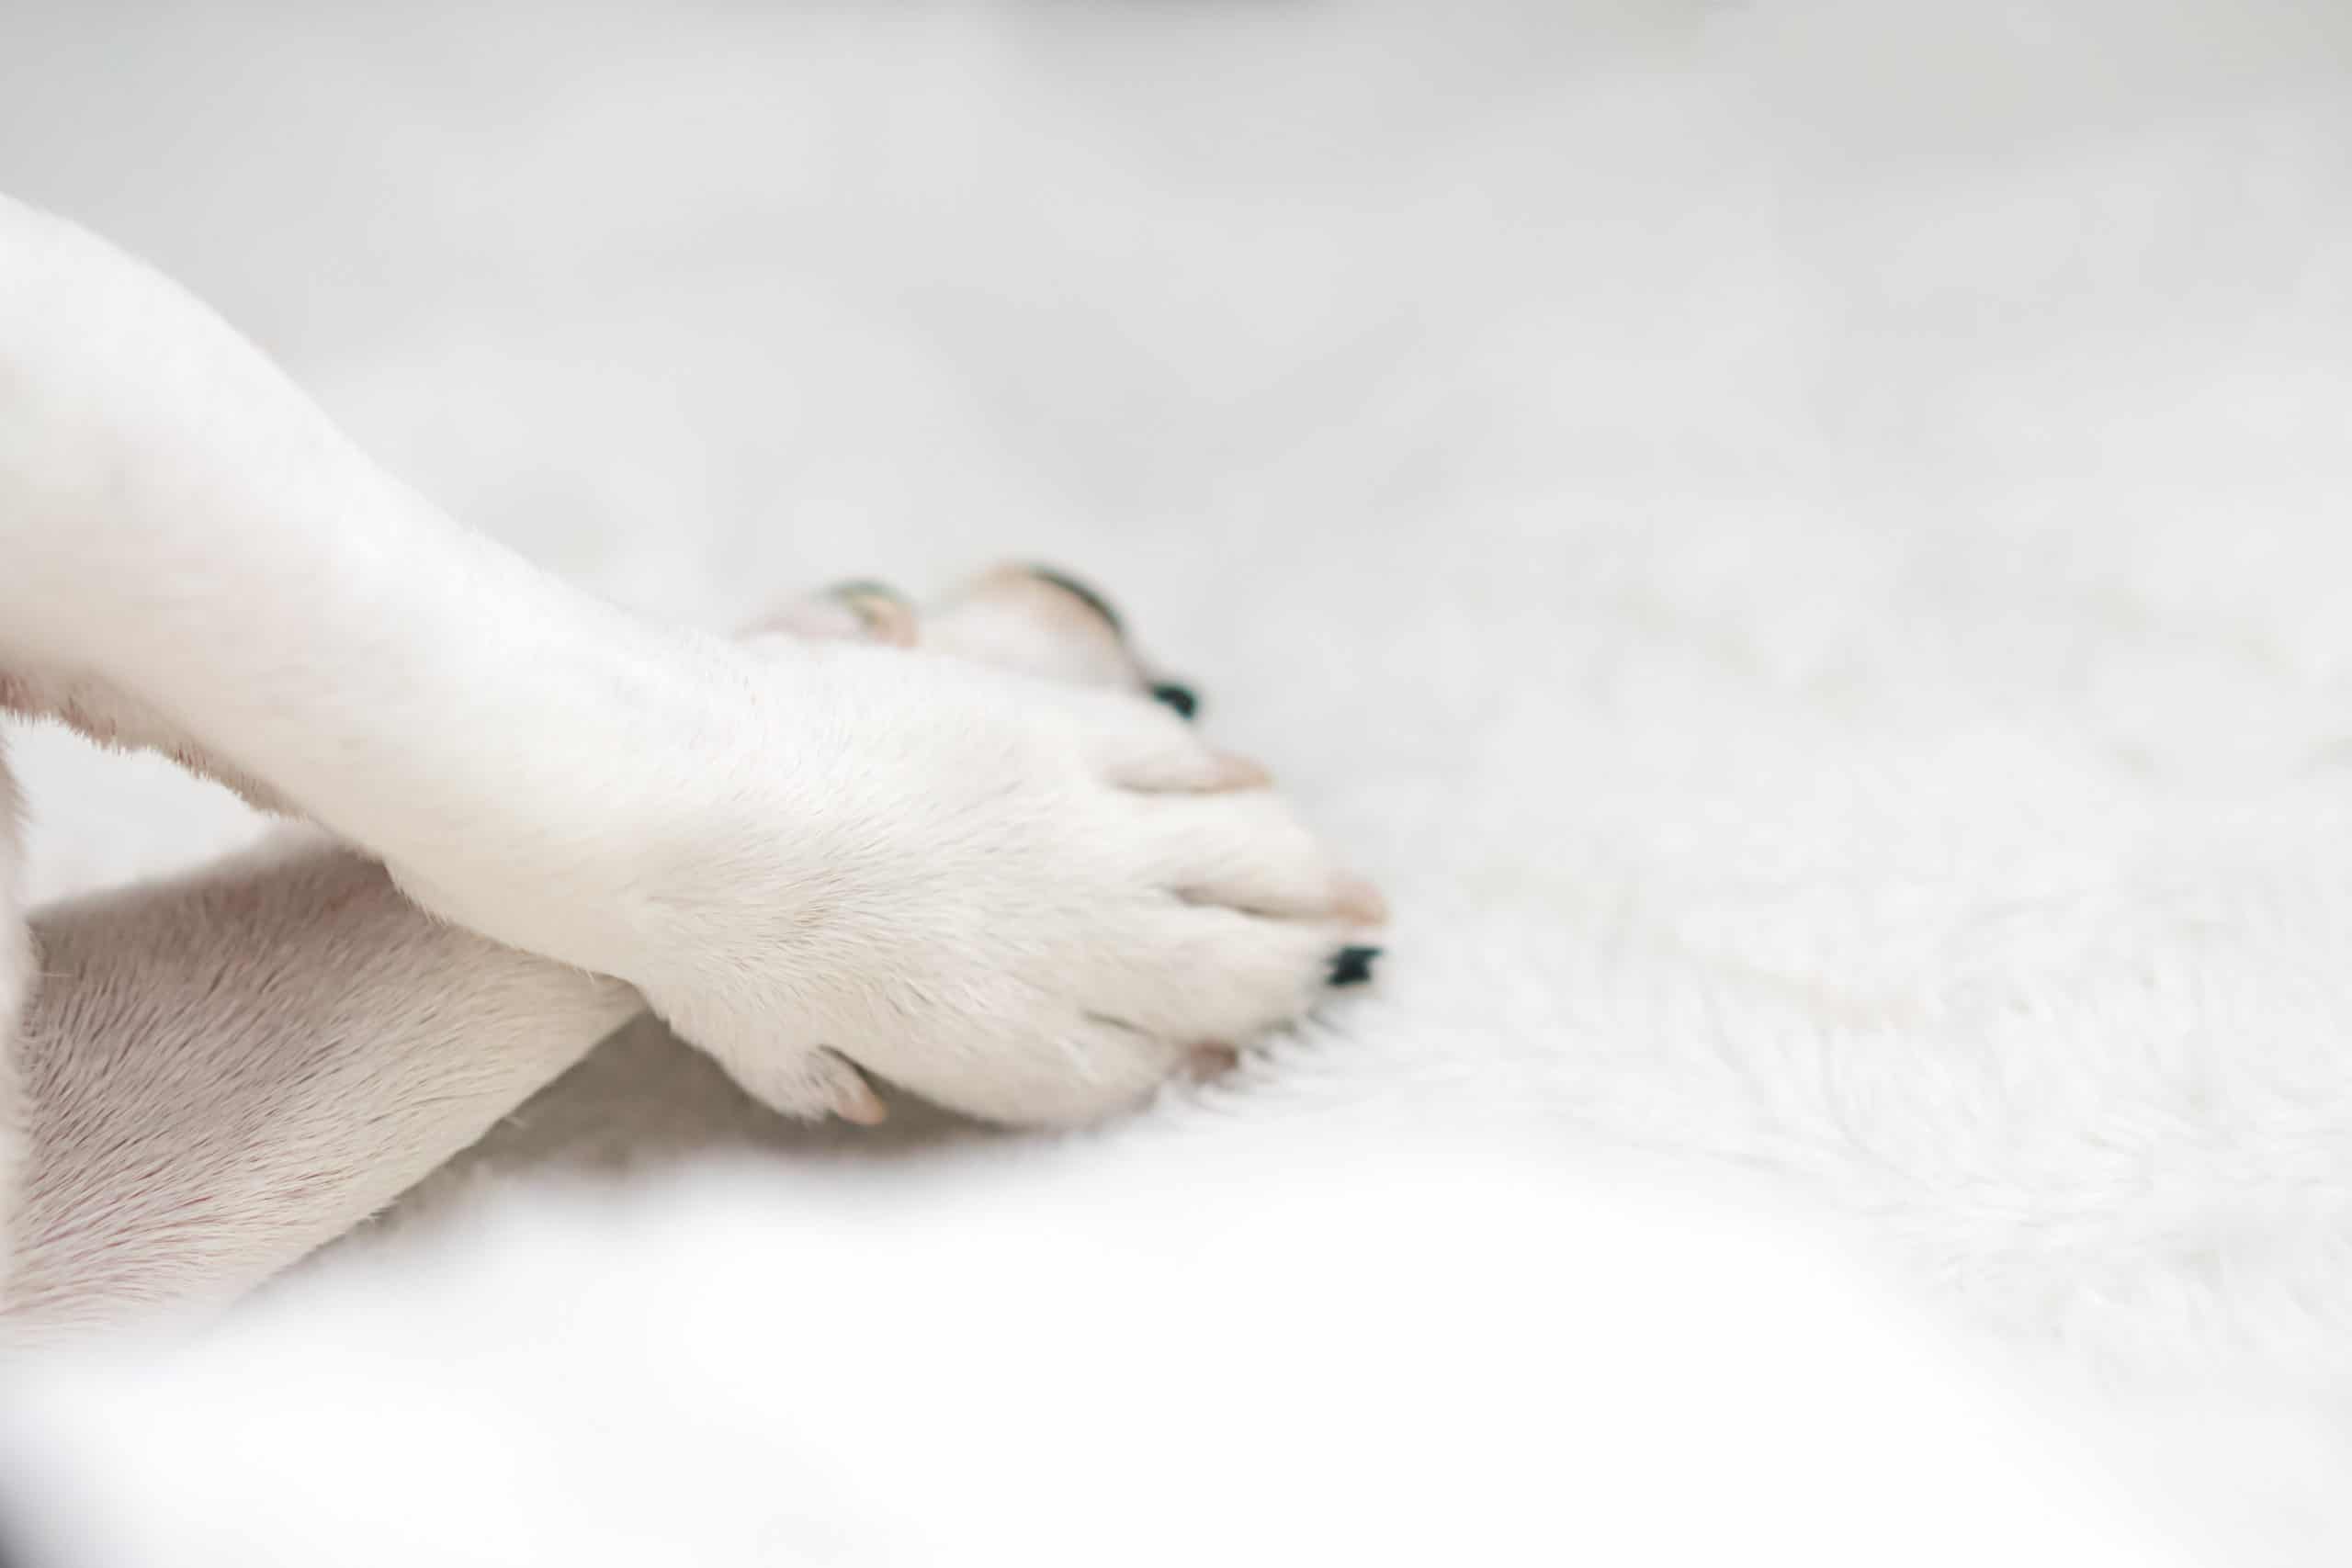 Why are my dog’s feet cold?